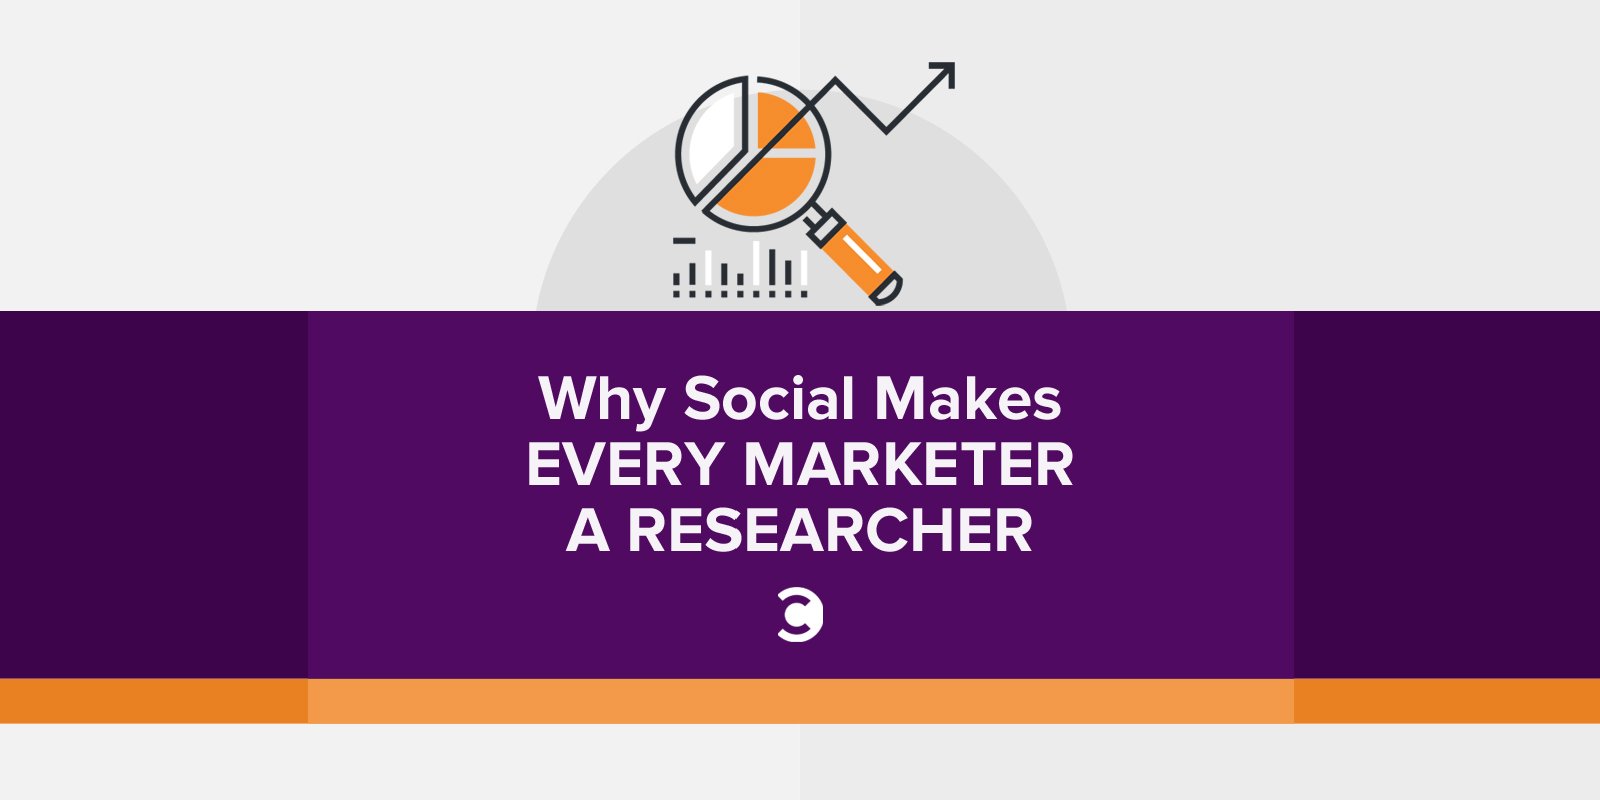 Why Social Makes Every Marketer a Researcher